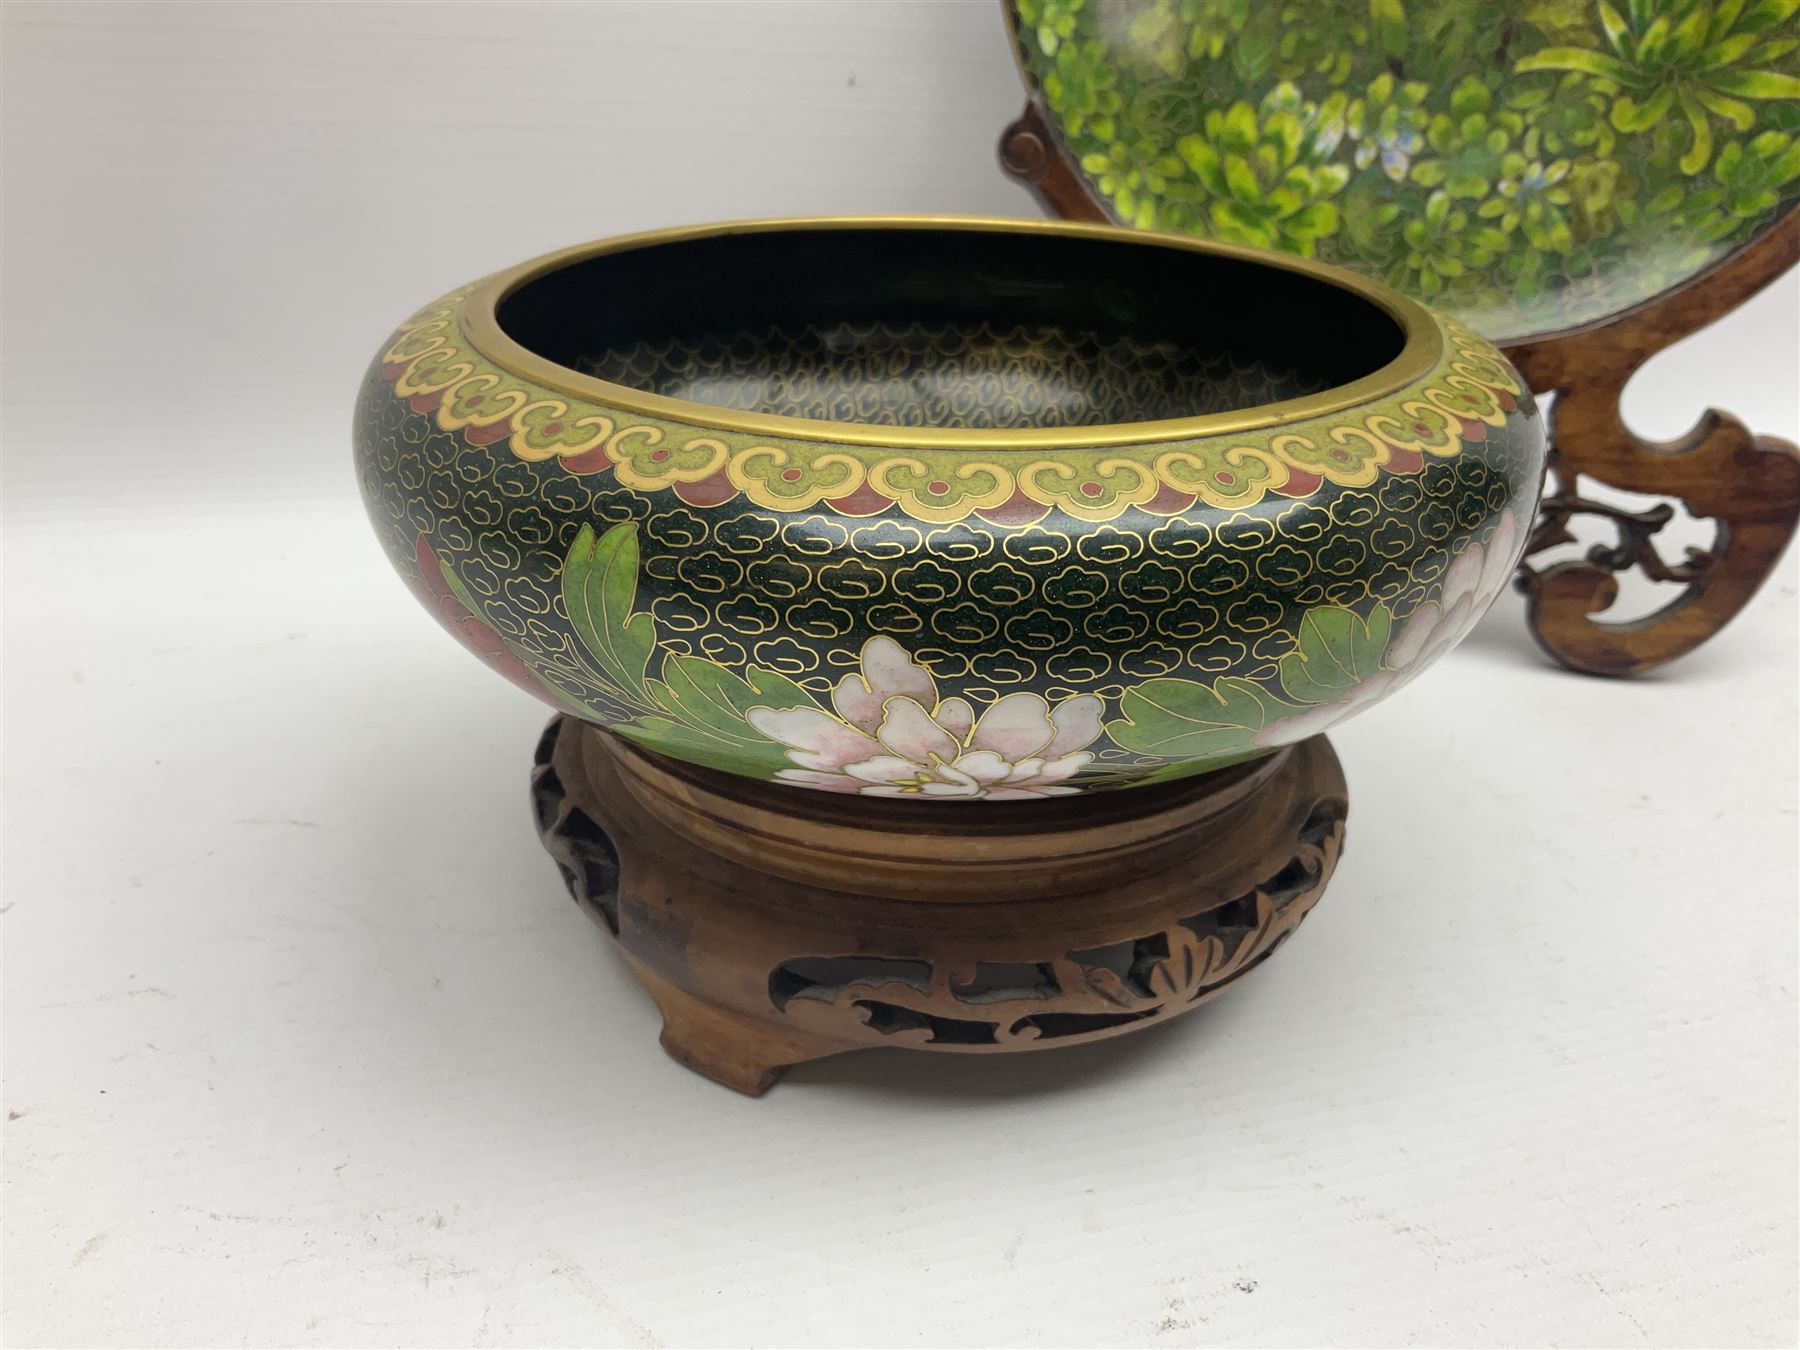 Pair of modern cloisonne ginger jars having floral decoration with a green ground - Image 8 of 13